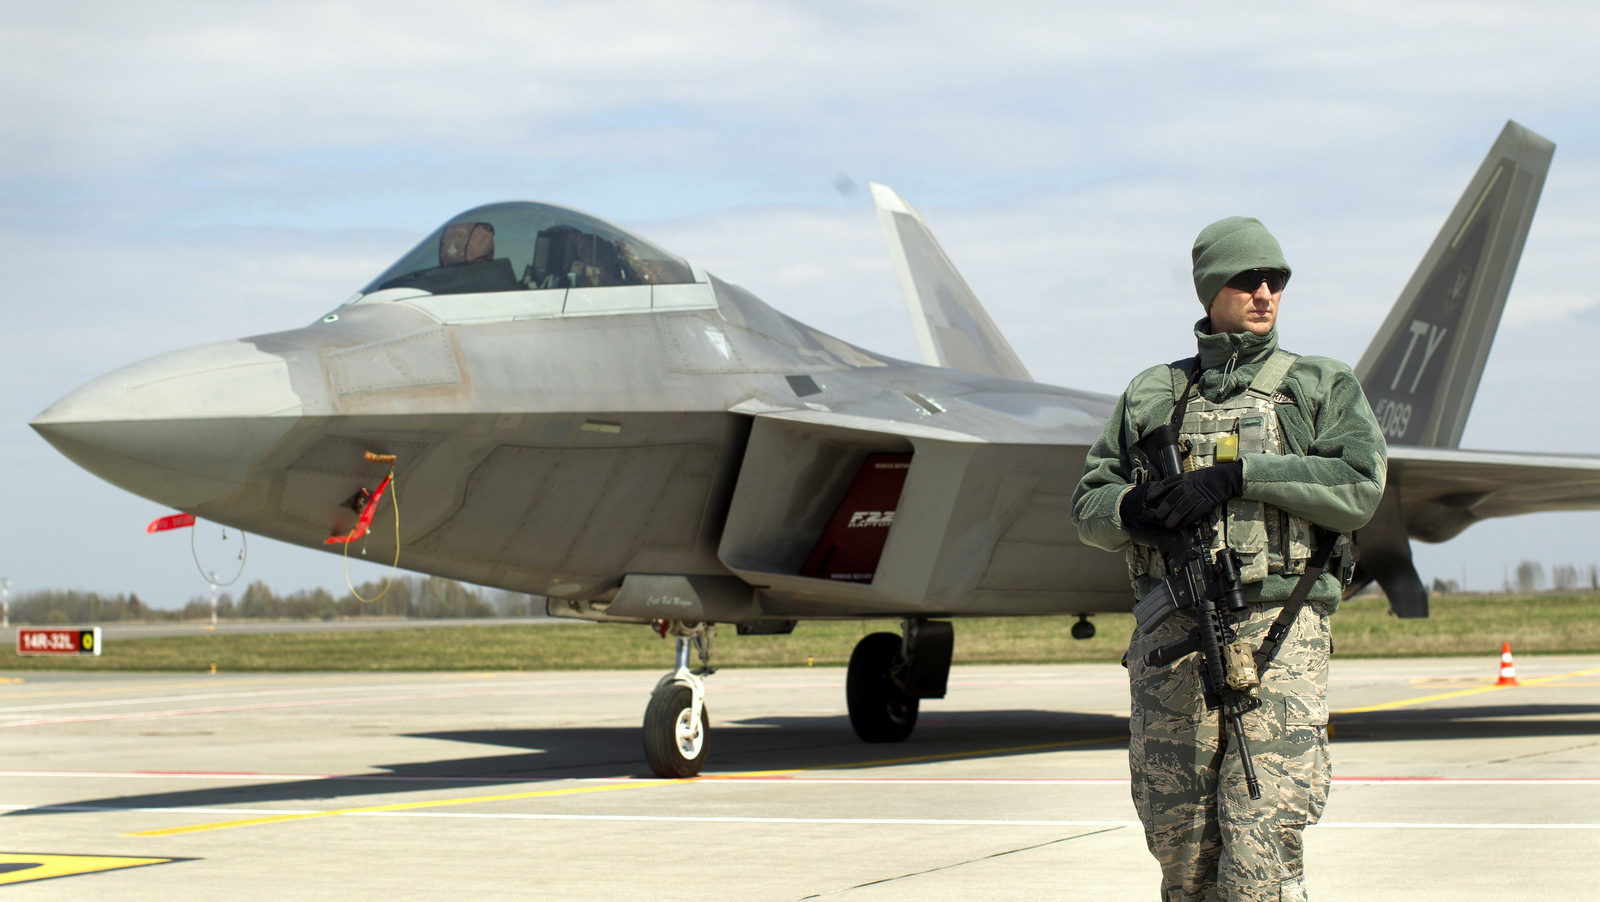 A U.S. military policeman stands in front of a U.S. Air Force F-22 Raptor fighter jet at the Siauliai airbase, some 230 km (144 miles) east of the capital Vilnius, Lithuania, Wednesday, April 27, 2016. (AP/Mindaugas Kulbis)